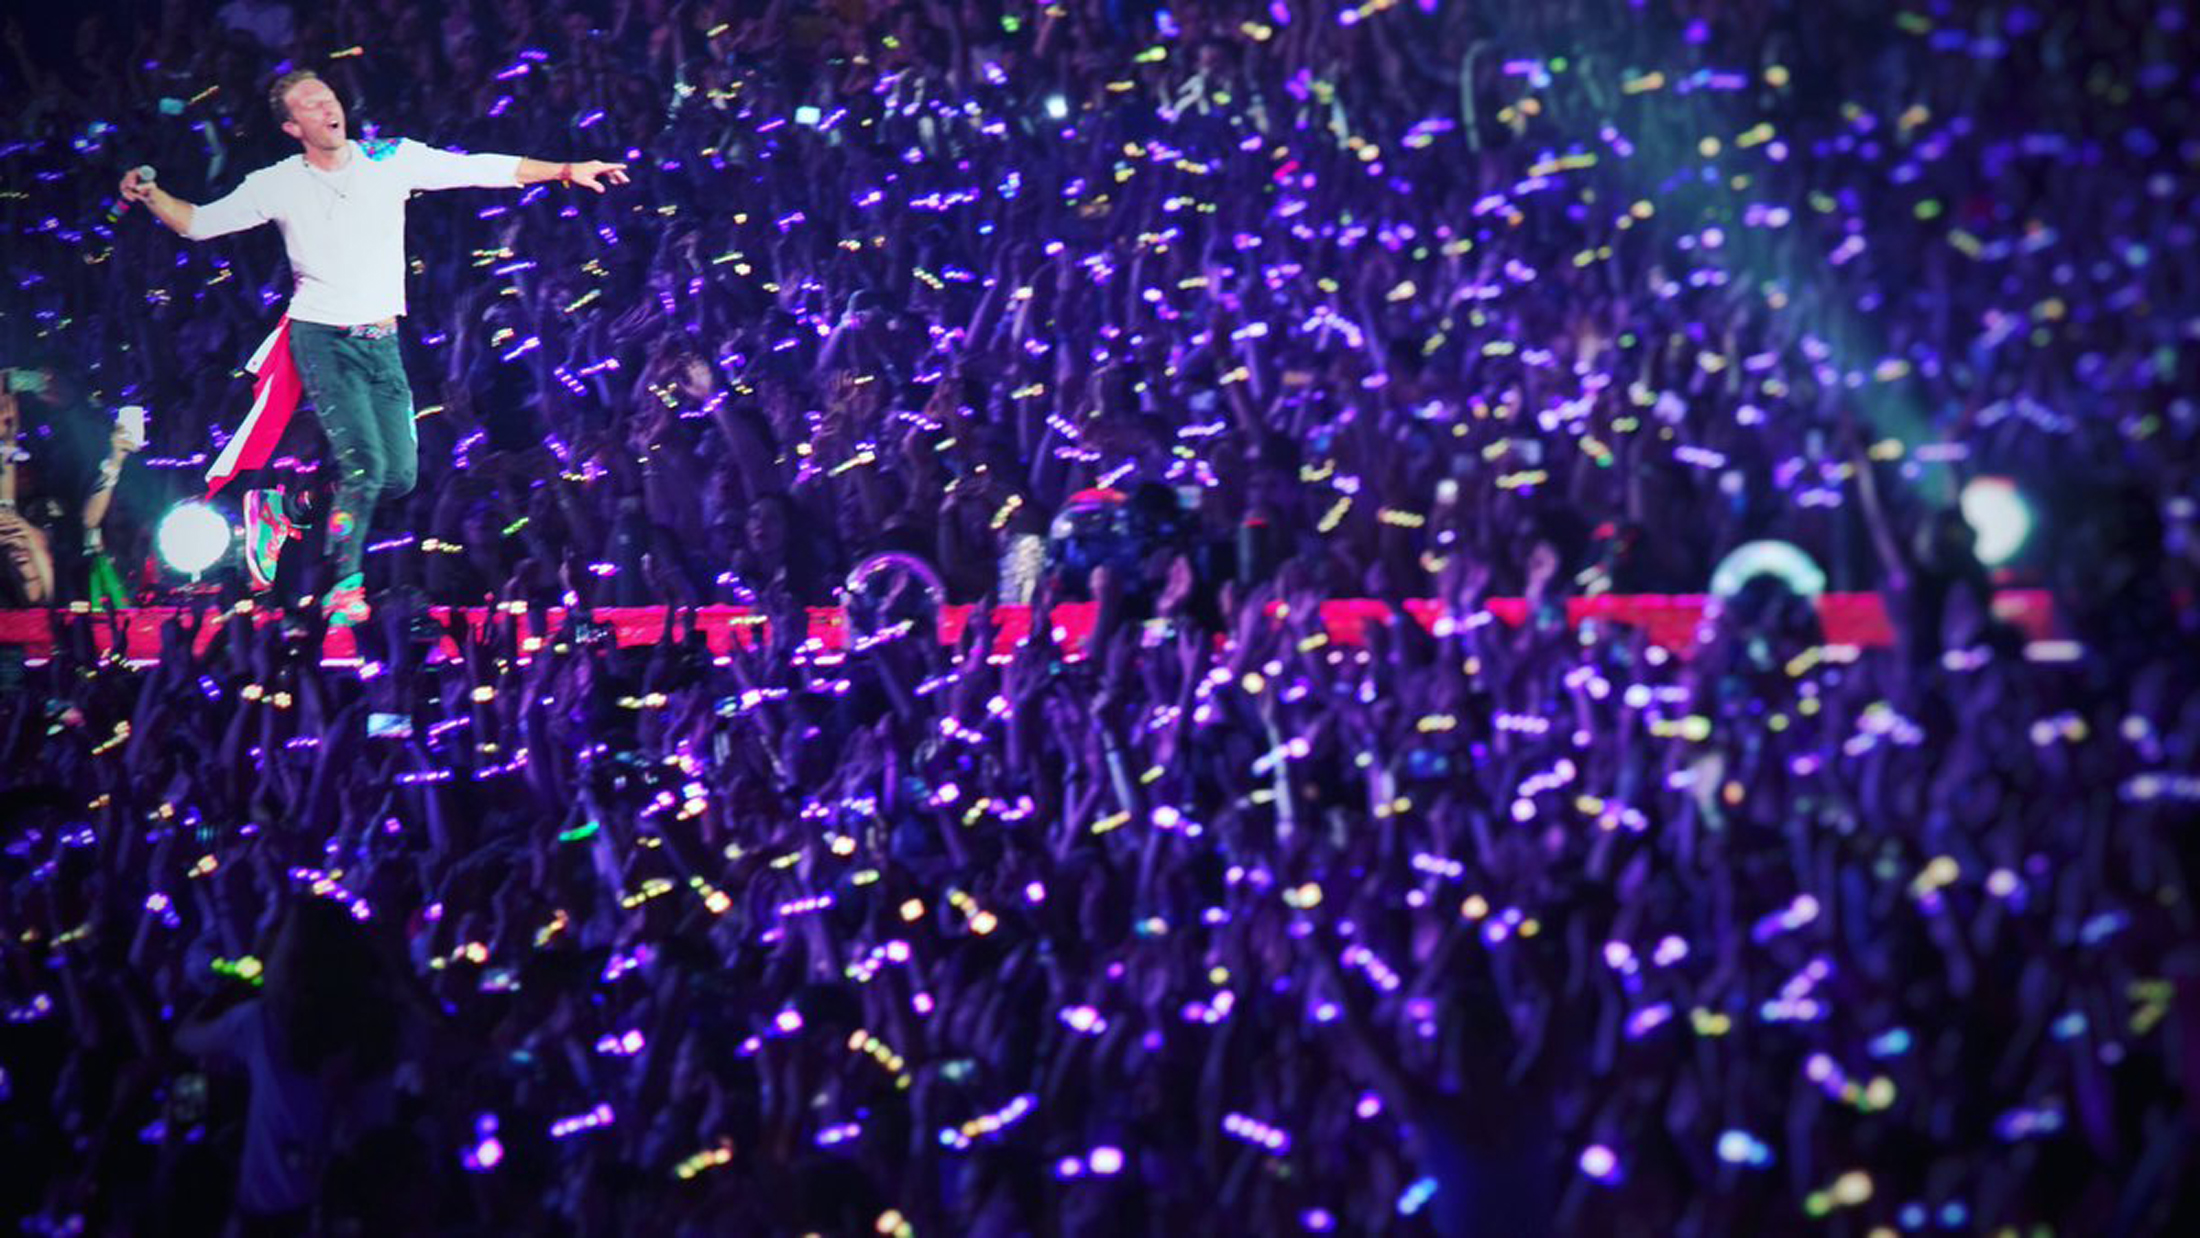 Xylobands LED wristbands lighting up COLDPLAY on tour